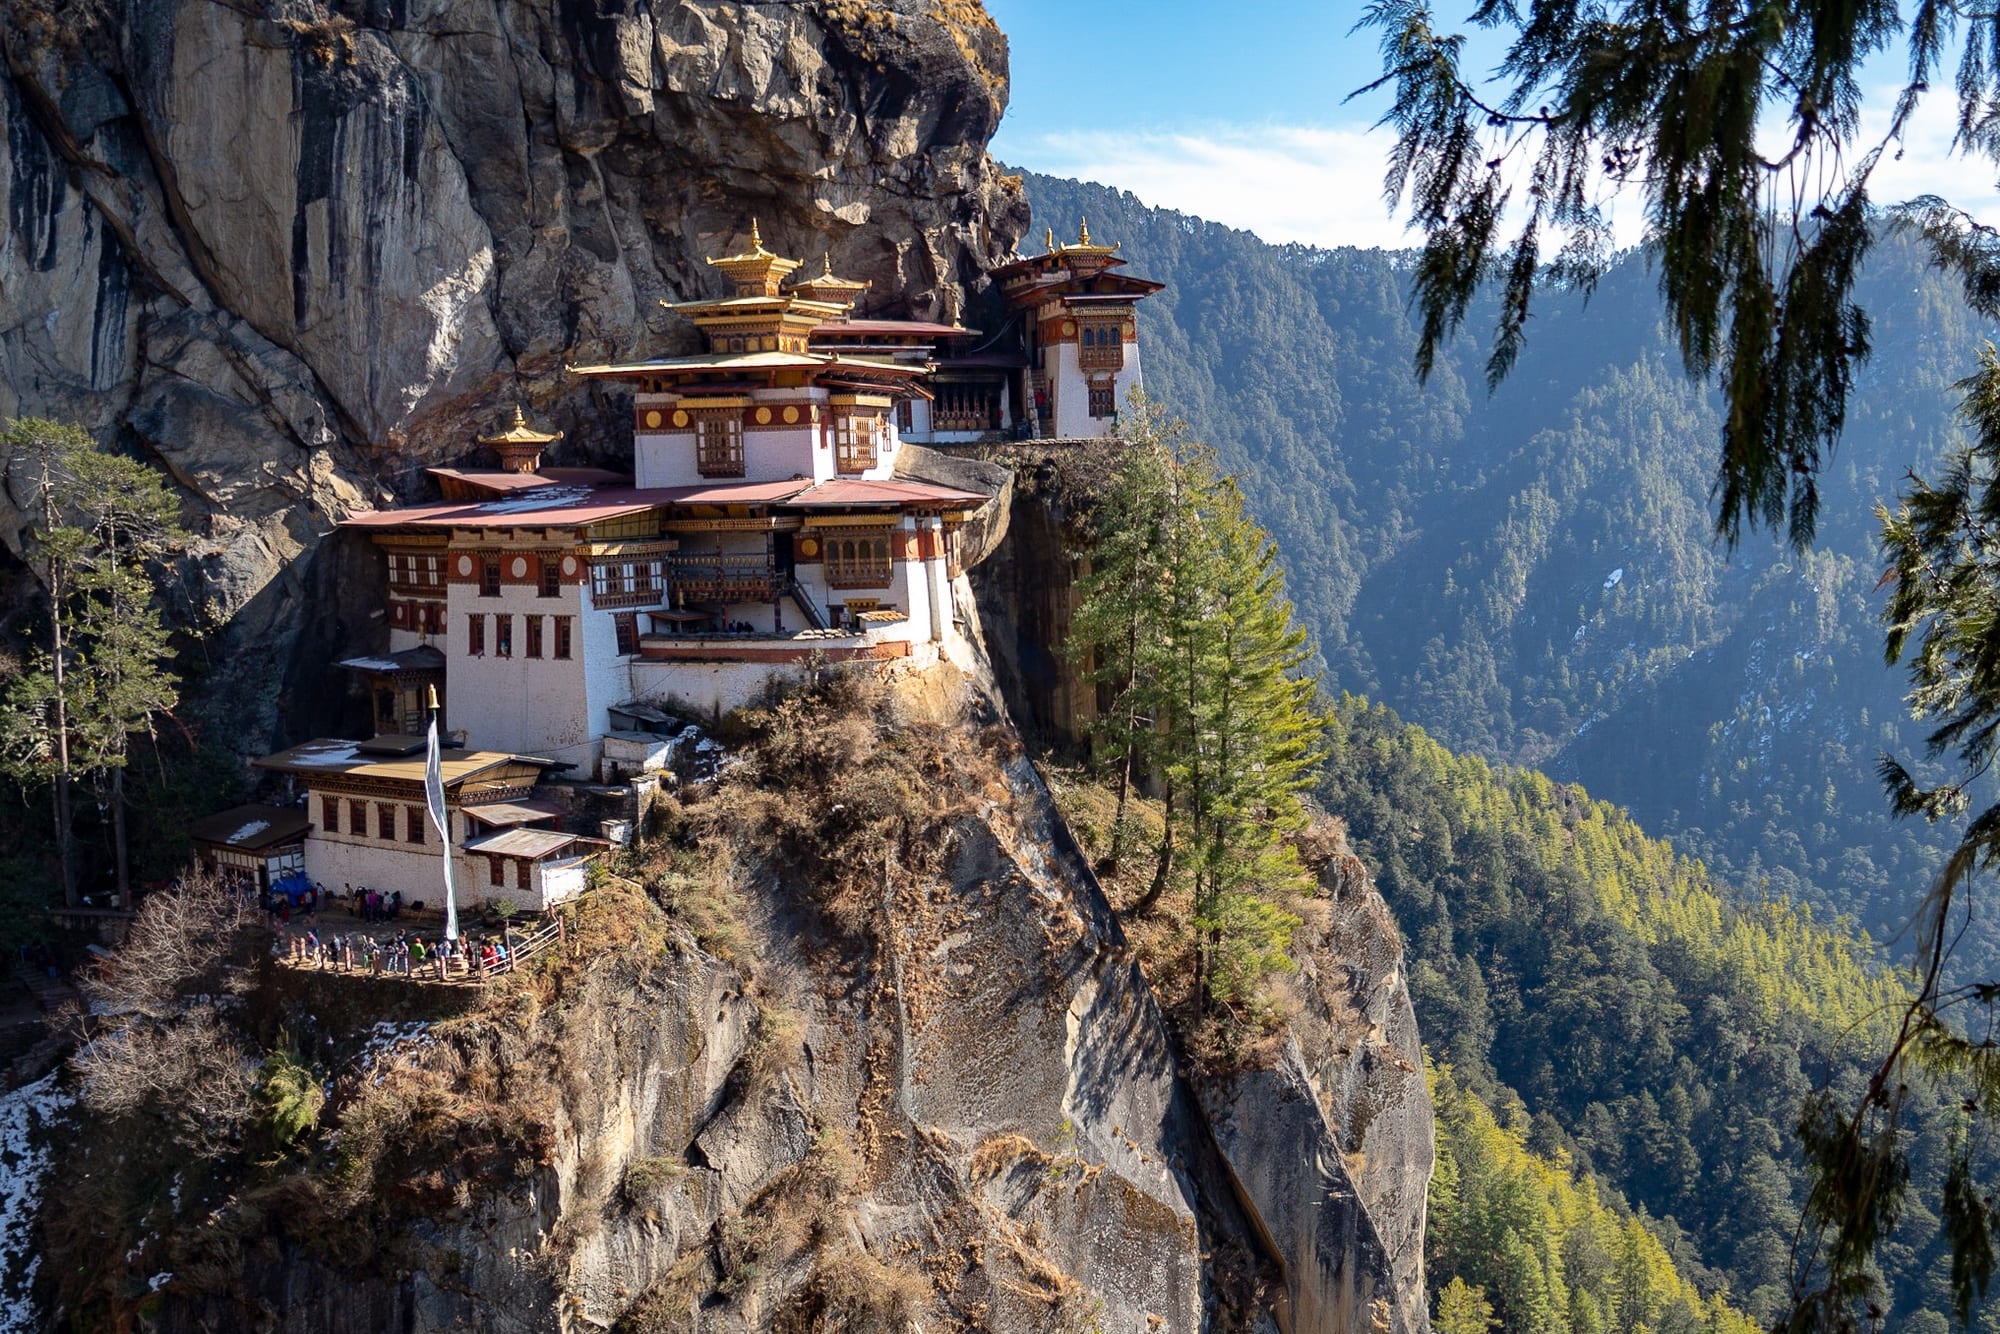 Tiger's Nest Monastery Things to do in Bhutan with kids